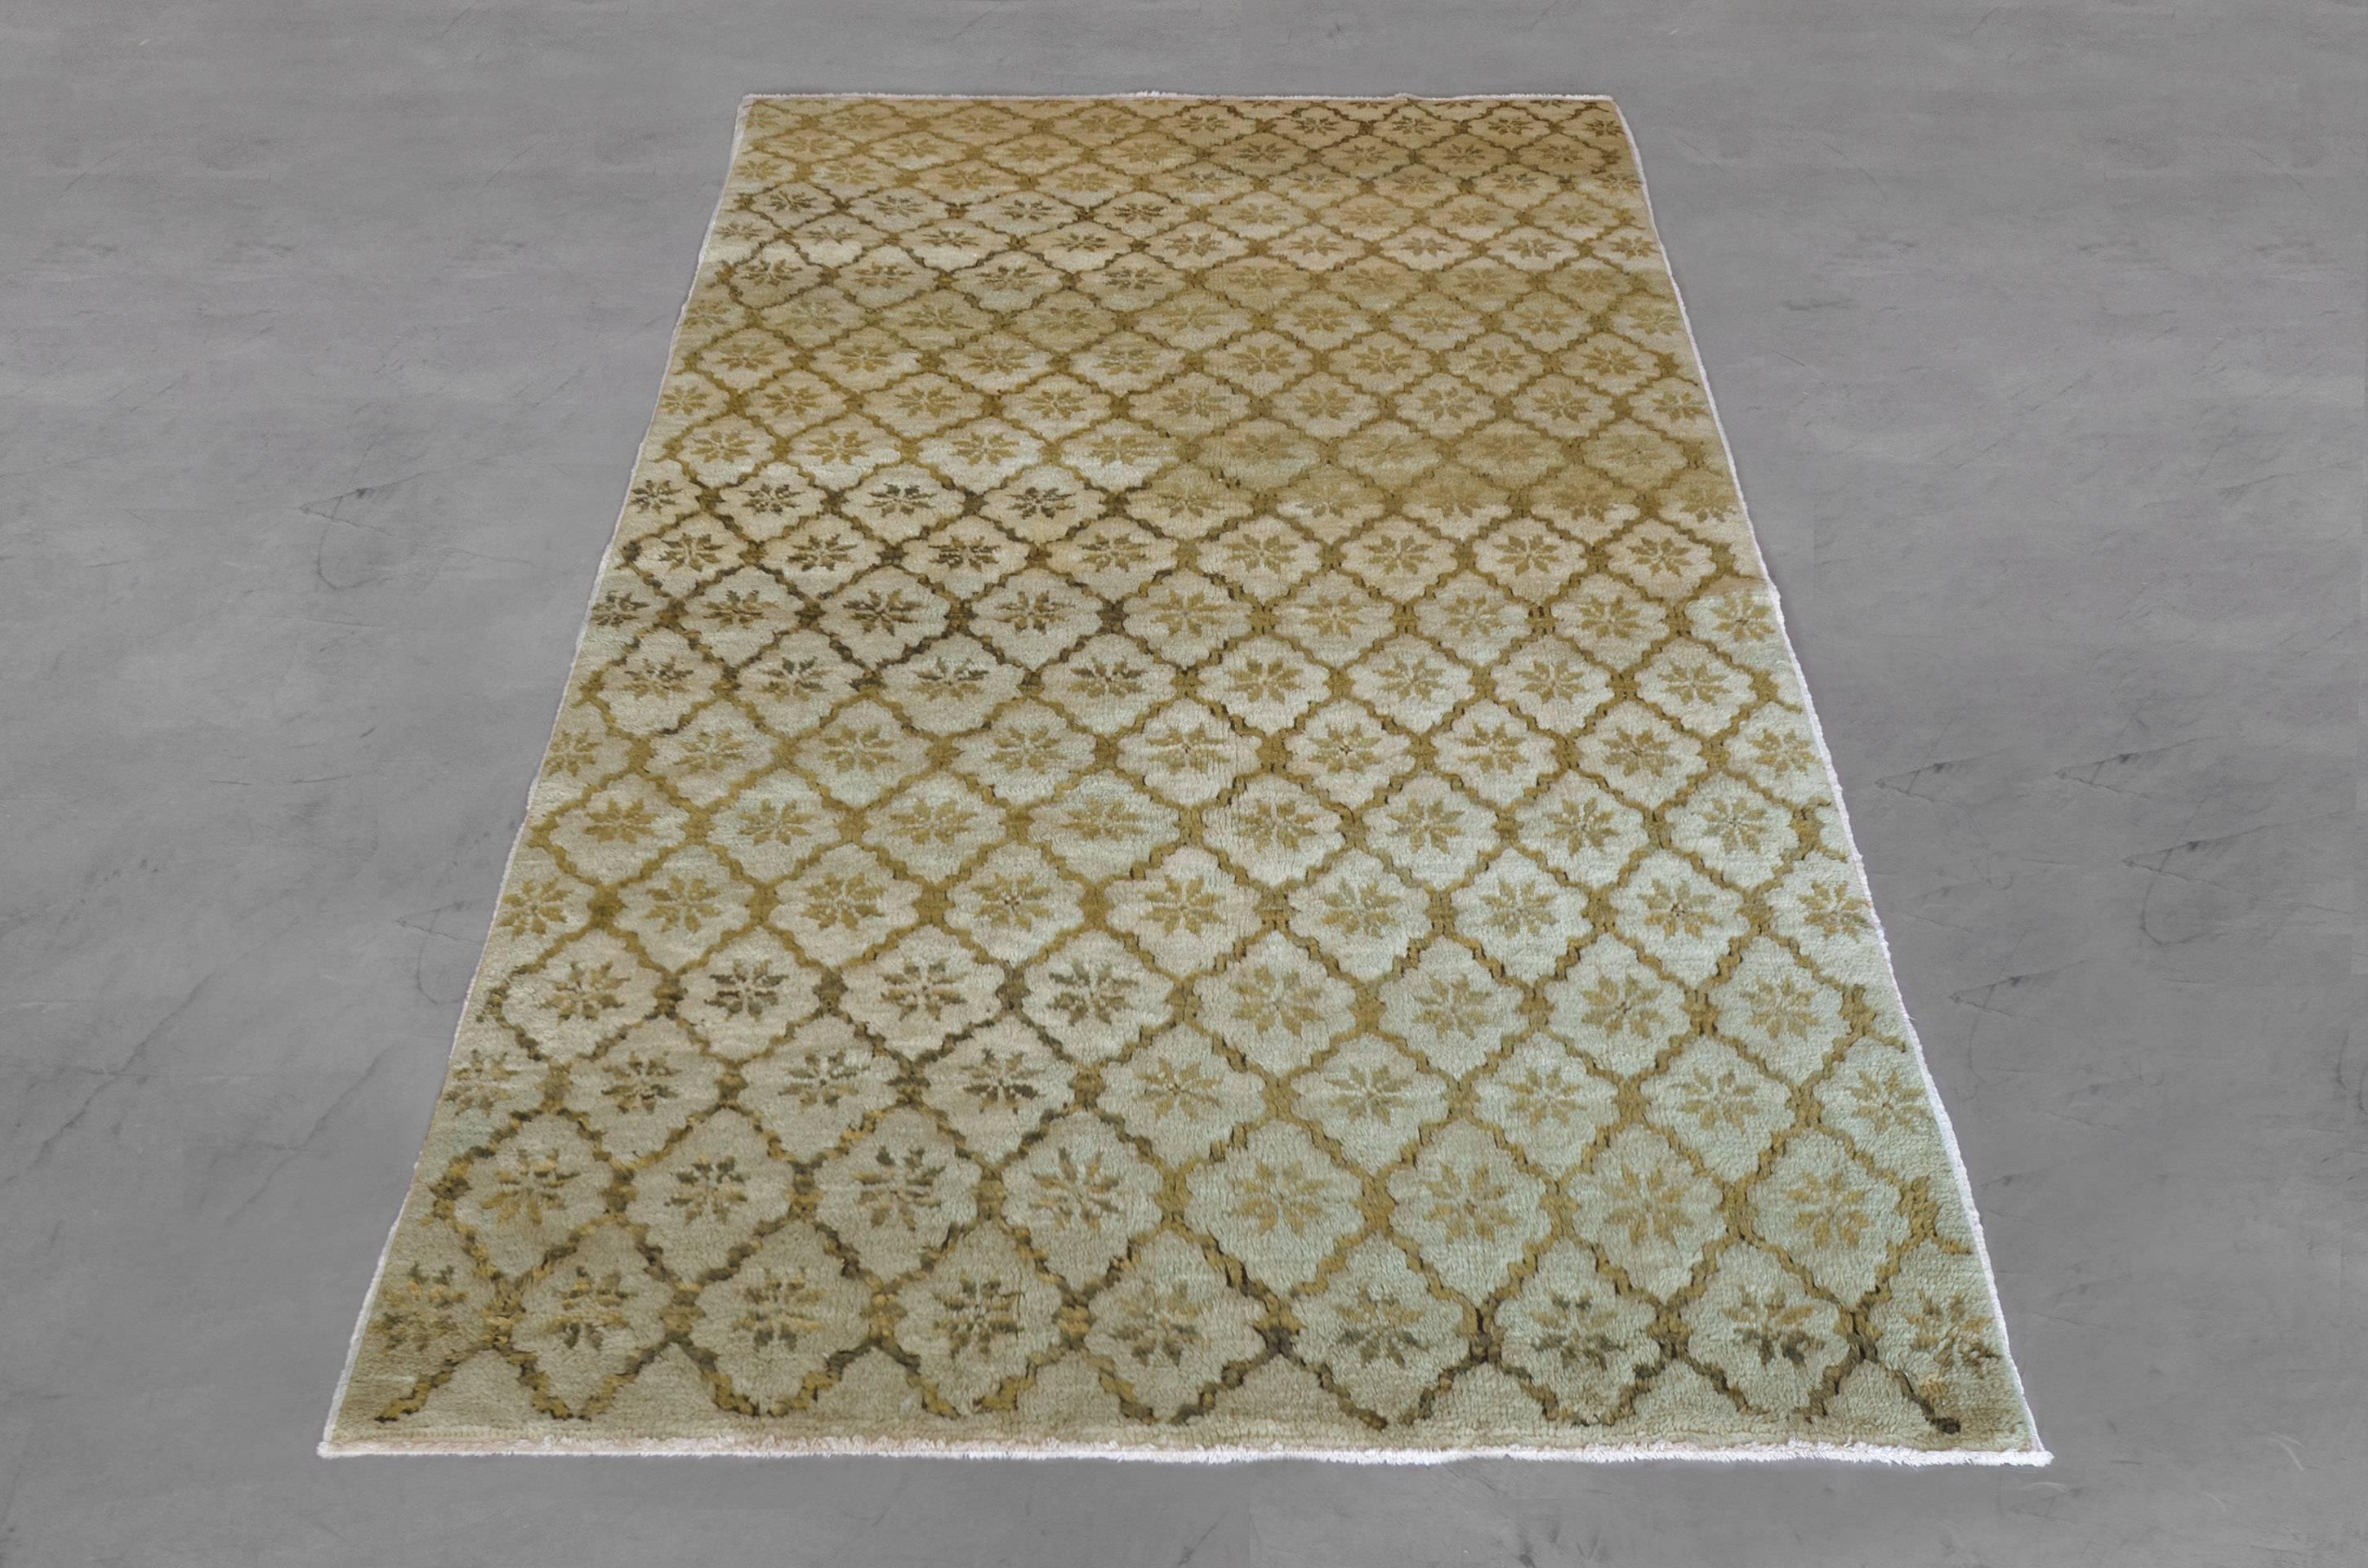 This hand-knotted, wool Turkish rug from the mid-20th century showcases a delicate all-over pattern in an understated palette of green earth tones. The delicate, modern rosette motif tessellates across the 5’ x 8’ soft pistachio green field